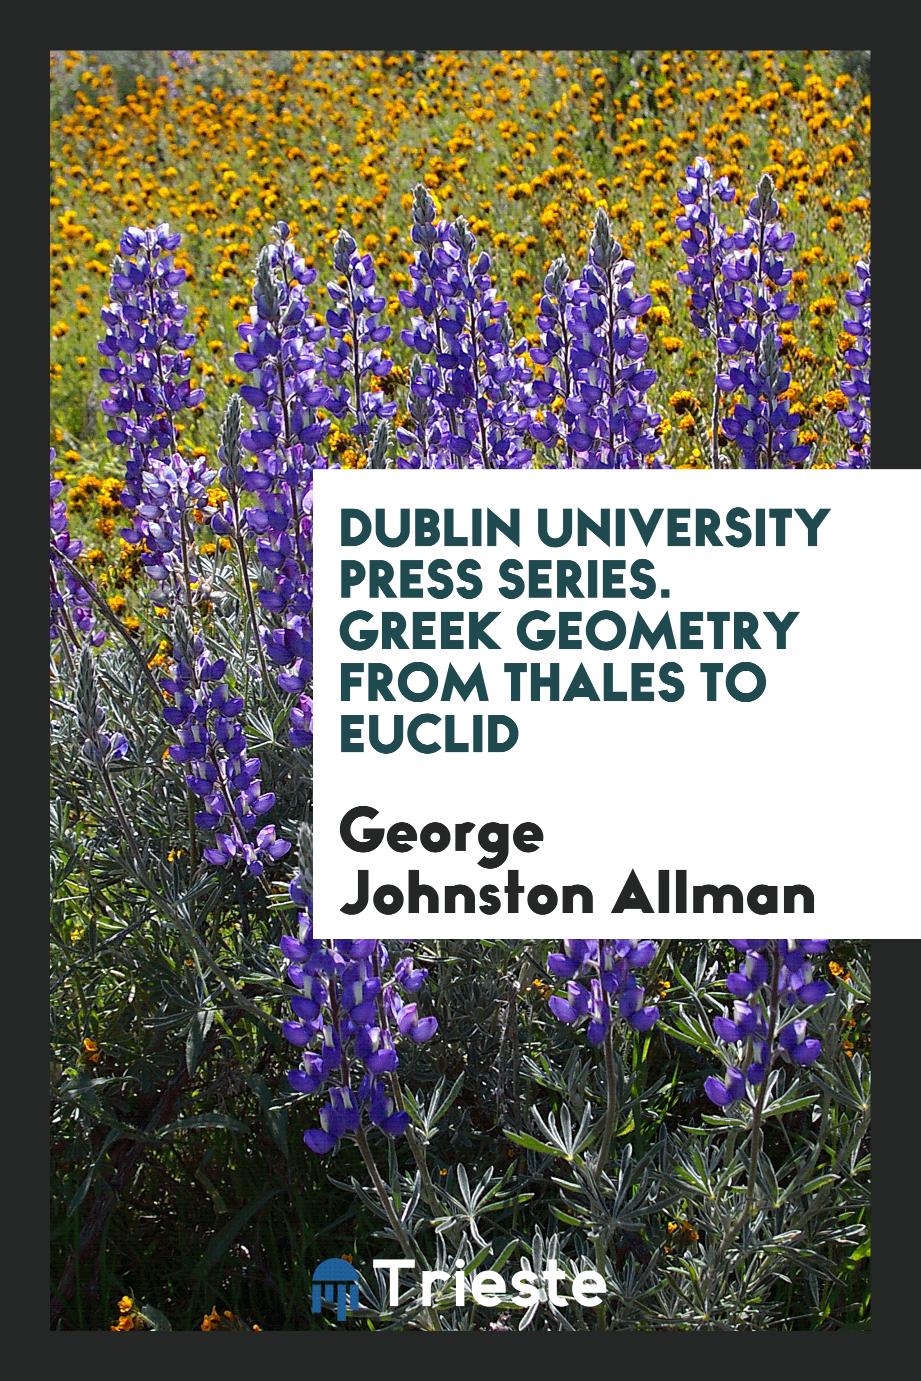 Dublin University Press Series. Greek Geometry from Thales to Euclid